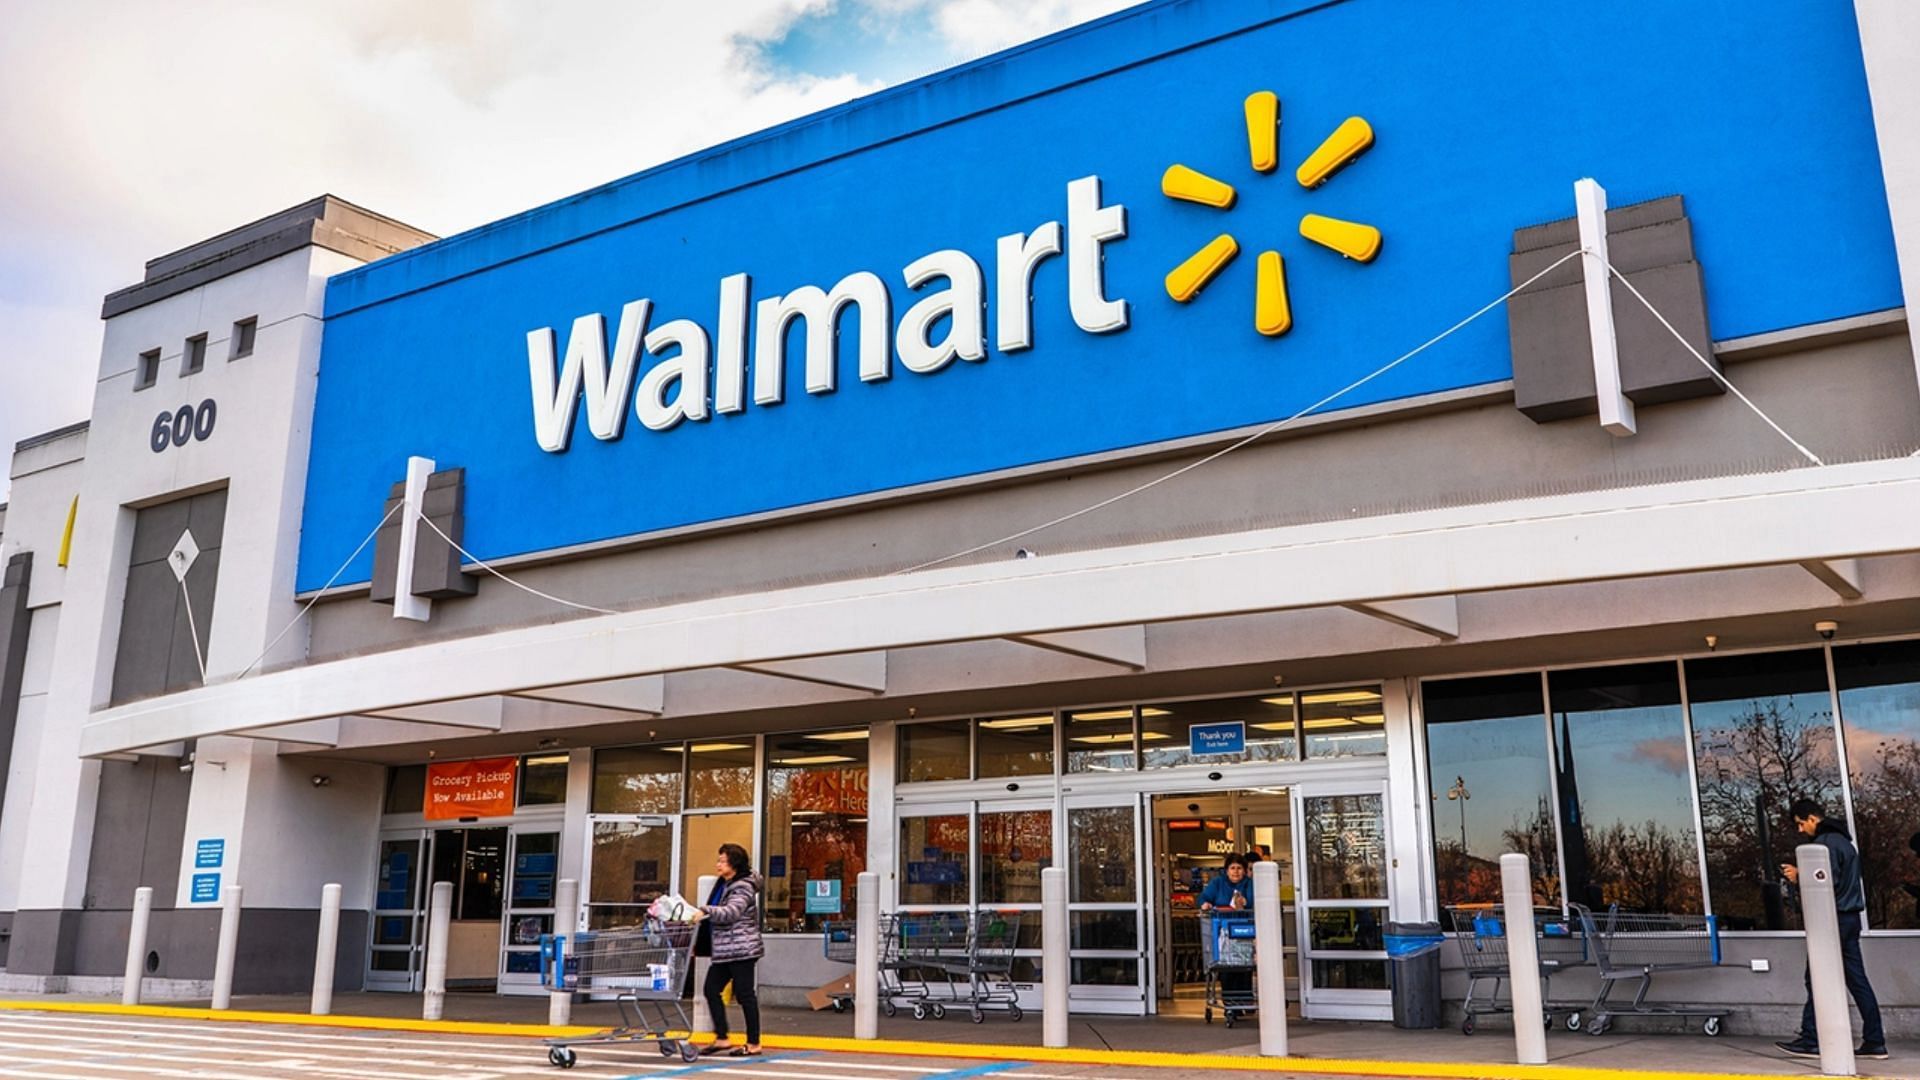 List of Closing Walmart stores, reason, date and more explored